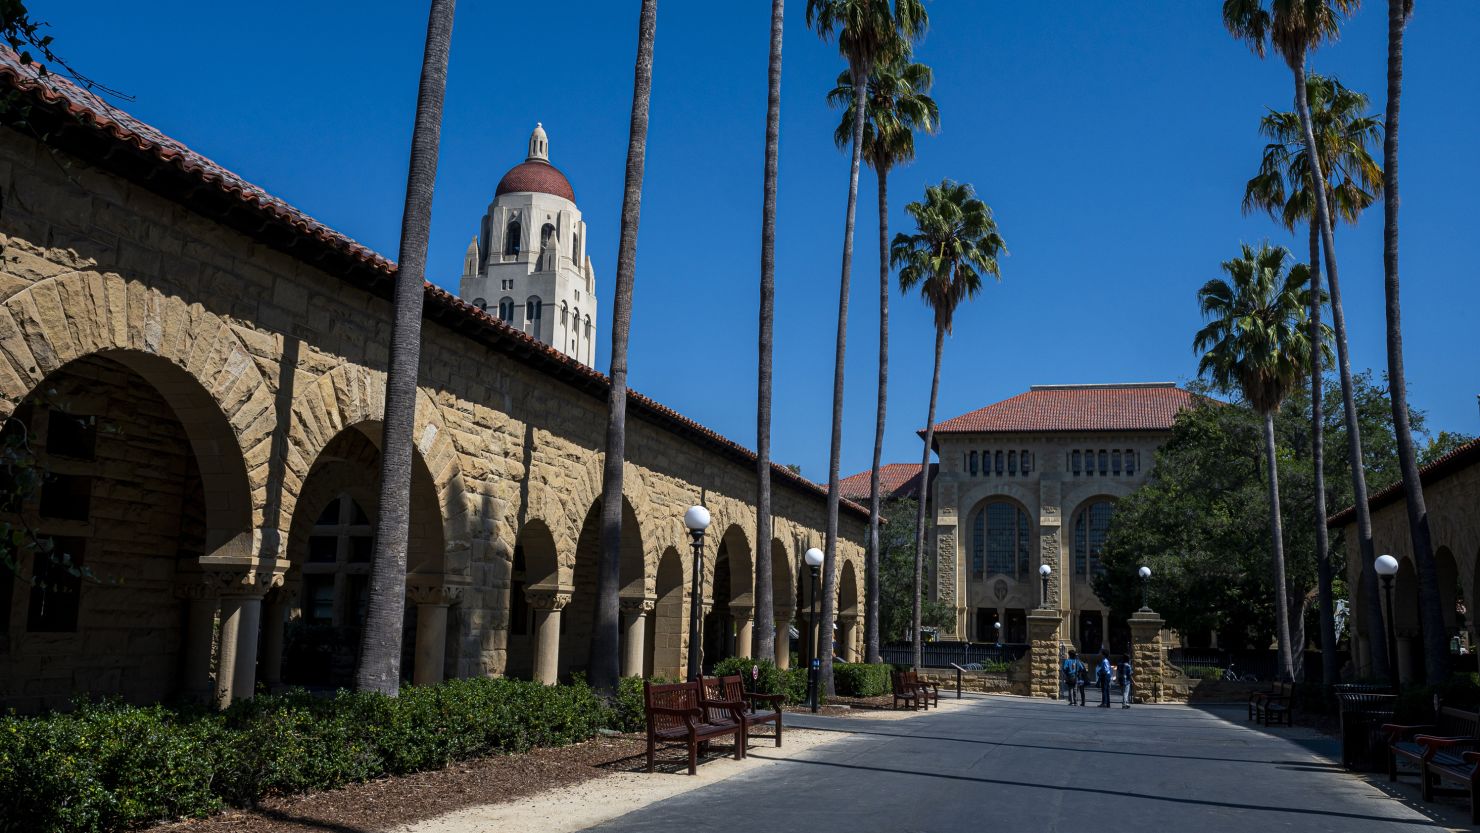 Stanford University in Stanford, California, US, on Thursday, Sept. 14, 2023. Stanford in 2022 raised more than $1 billion, for the sixth consecutive year, including its largest-ever gift for a new climate school. Photographer: David Paul Morris/Bloomberg via Getty Images